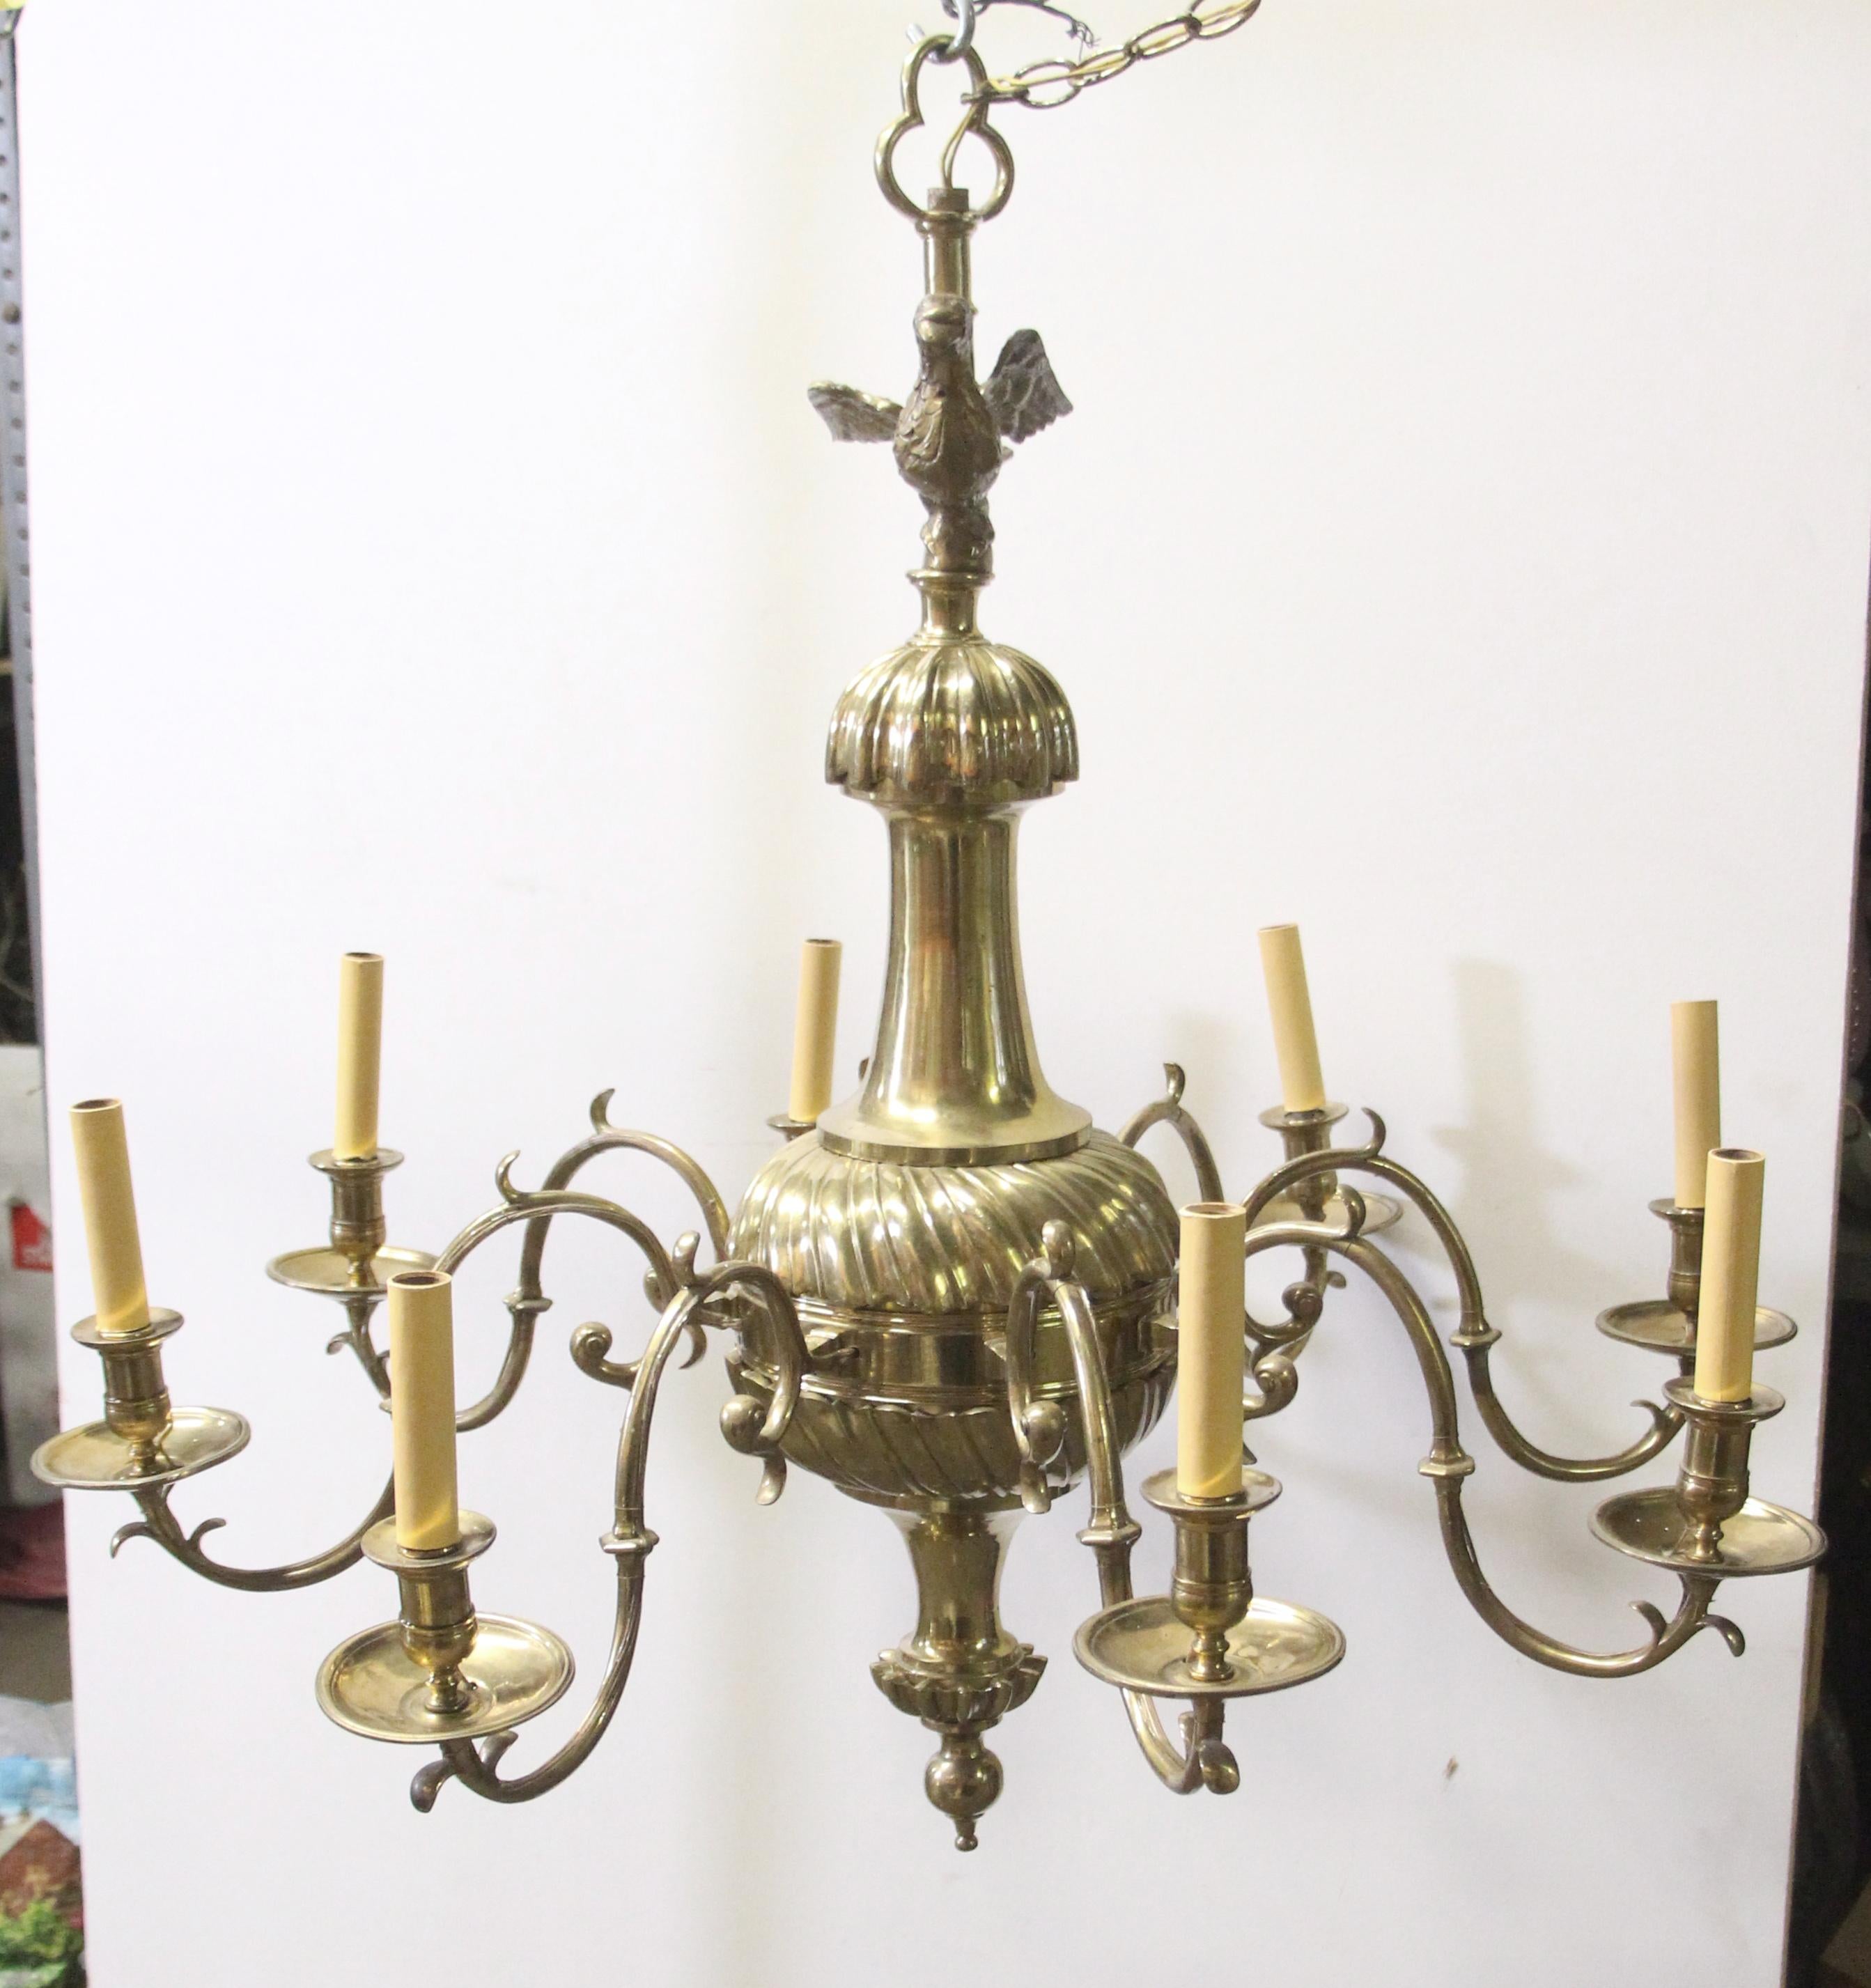 Polished Early 1900s Brass 8-Arm Chandelier from NYC Stock Exchange w/ Eagle Finial